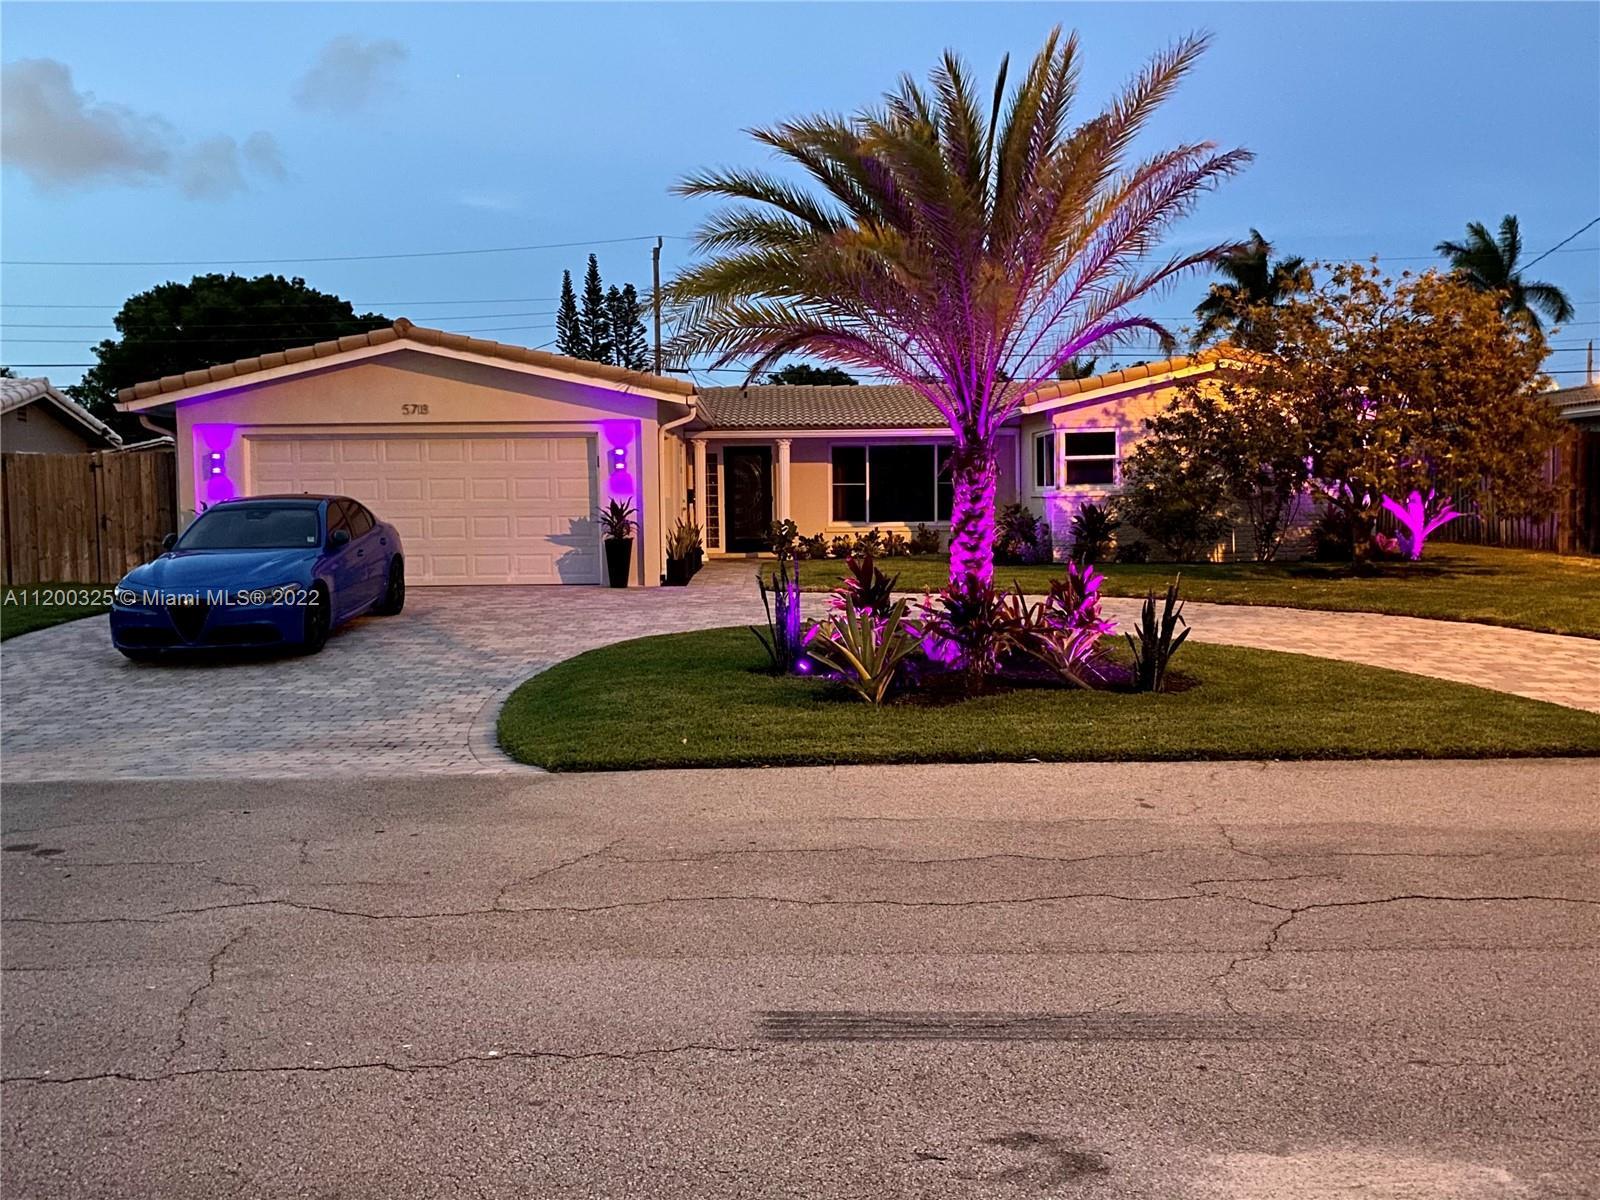 Modern masterpiece in Coral Ridge Isles. Situated on a beautiful interior street, this home contains